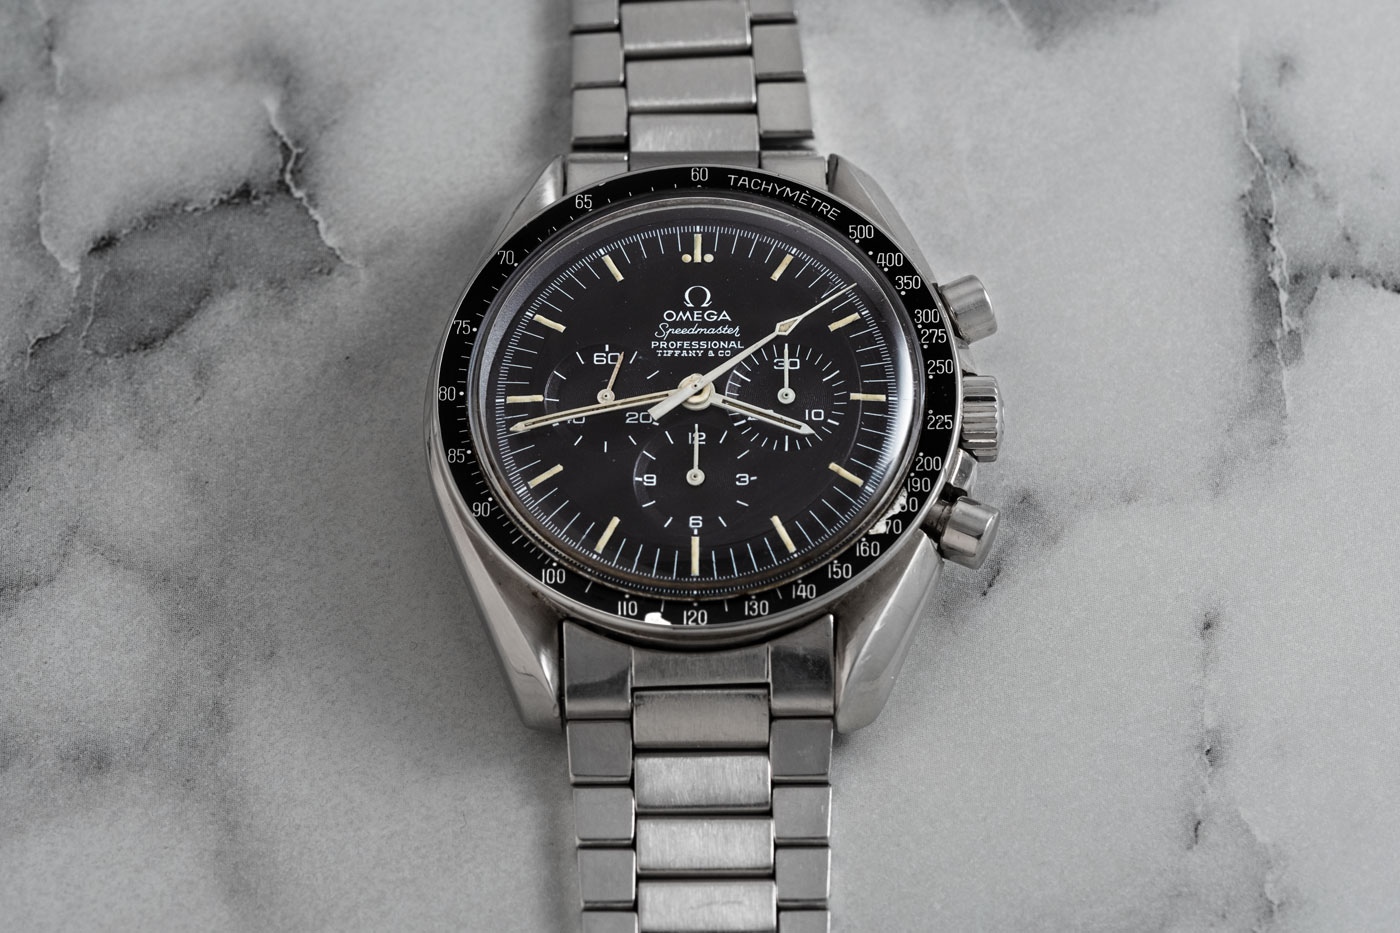 Tiffany Stamped Speedmaster ref. 145.022-69, part of the Phillips Hong Kong Watch Auction: Eight (Image © Revolution)